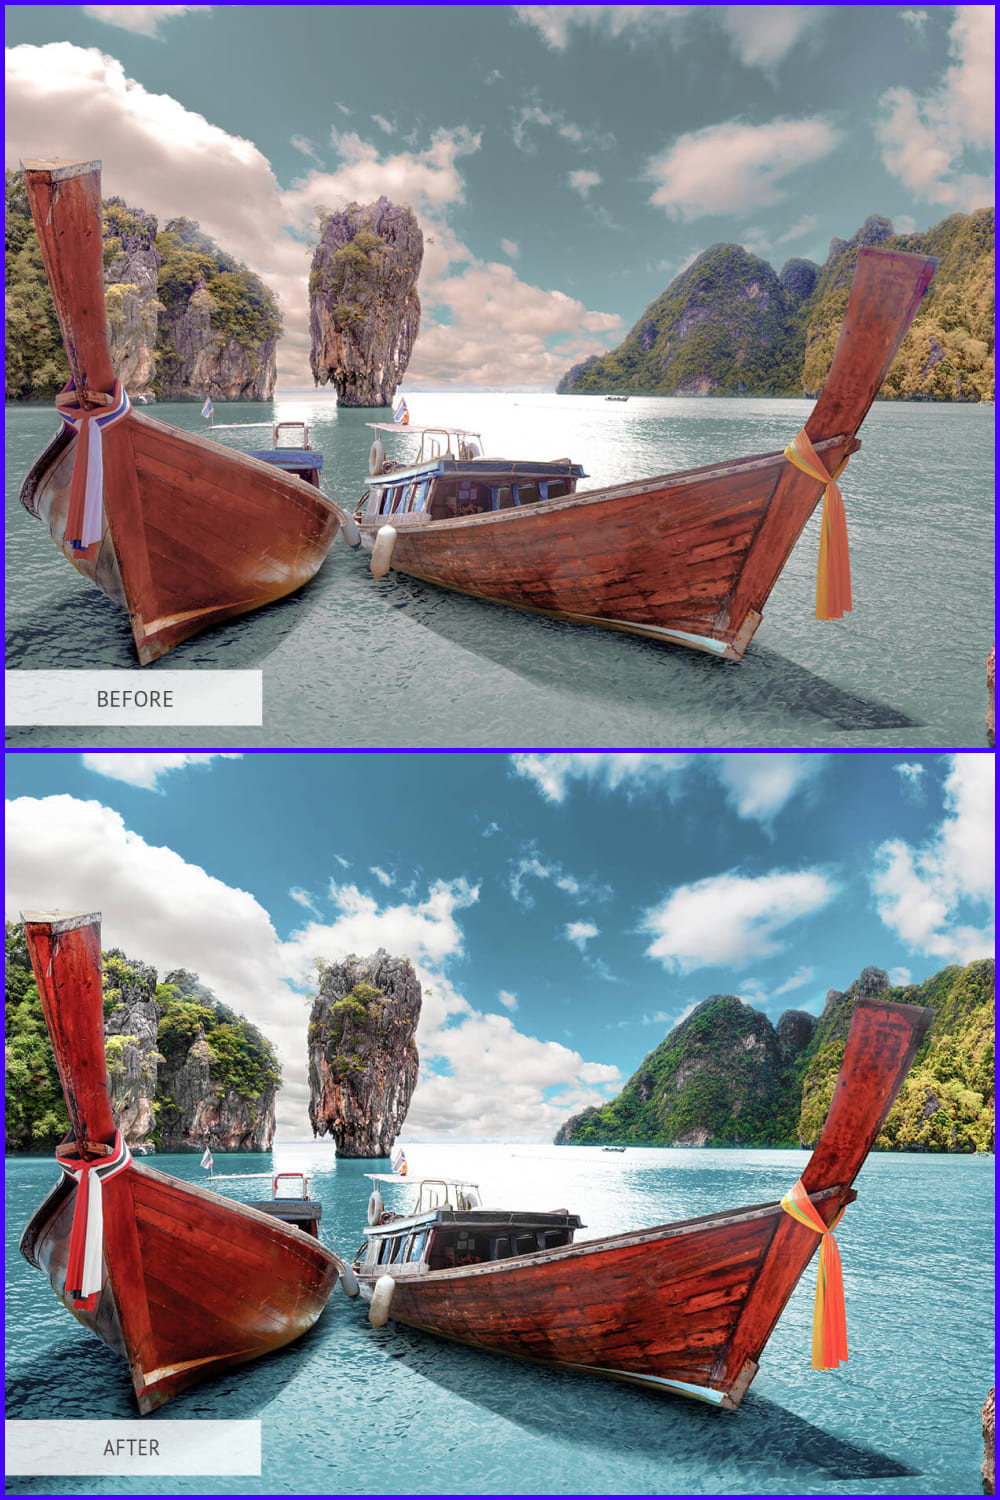 Collage of photos of two boats on the beach in Asia in different color shades.